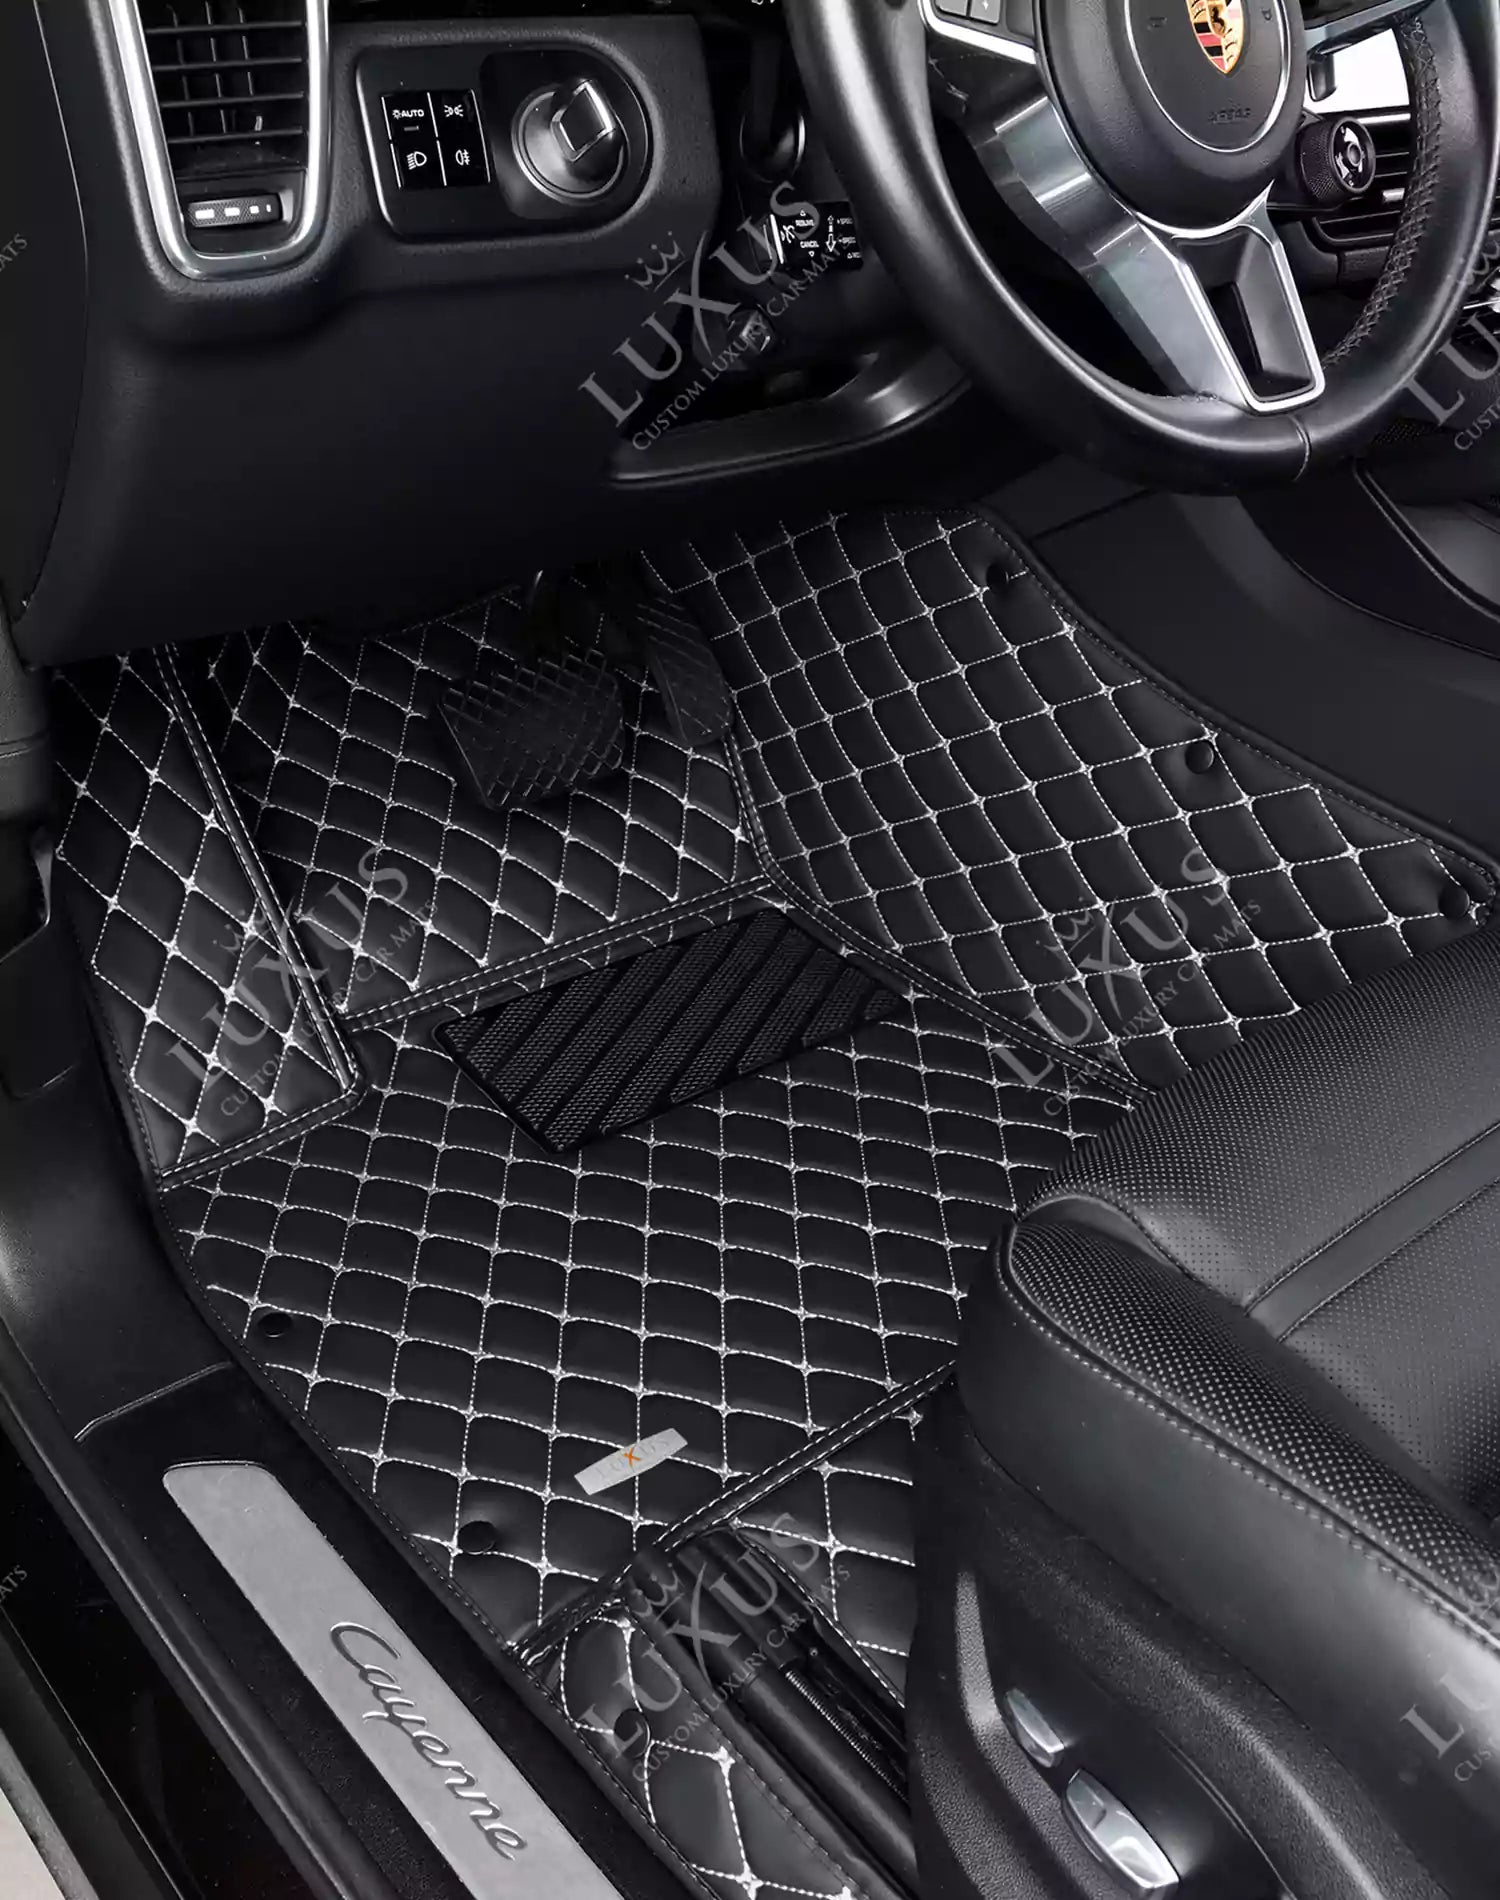  Custom Luxury Floor Mats Compatible with Peugeot 207 2009-2014  NO Wrinkles Car Mats Accessories Interior Replacement Parts Full Set (Color  : One Layer-07) : Automotive